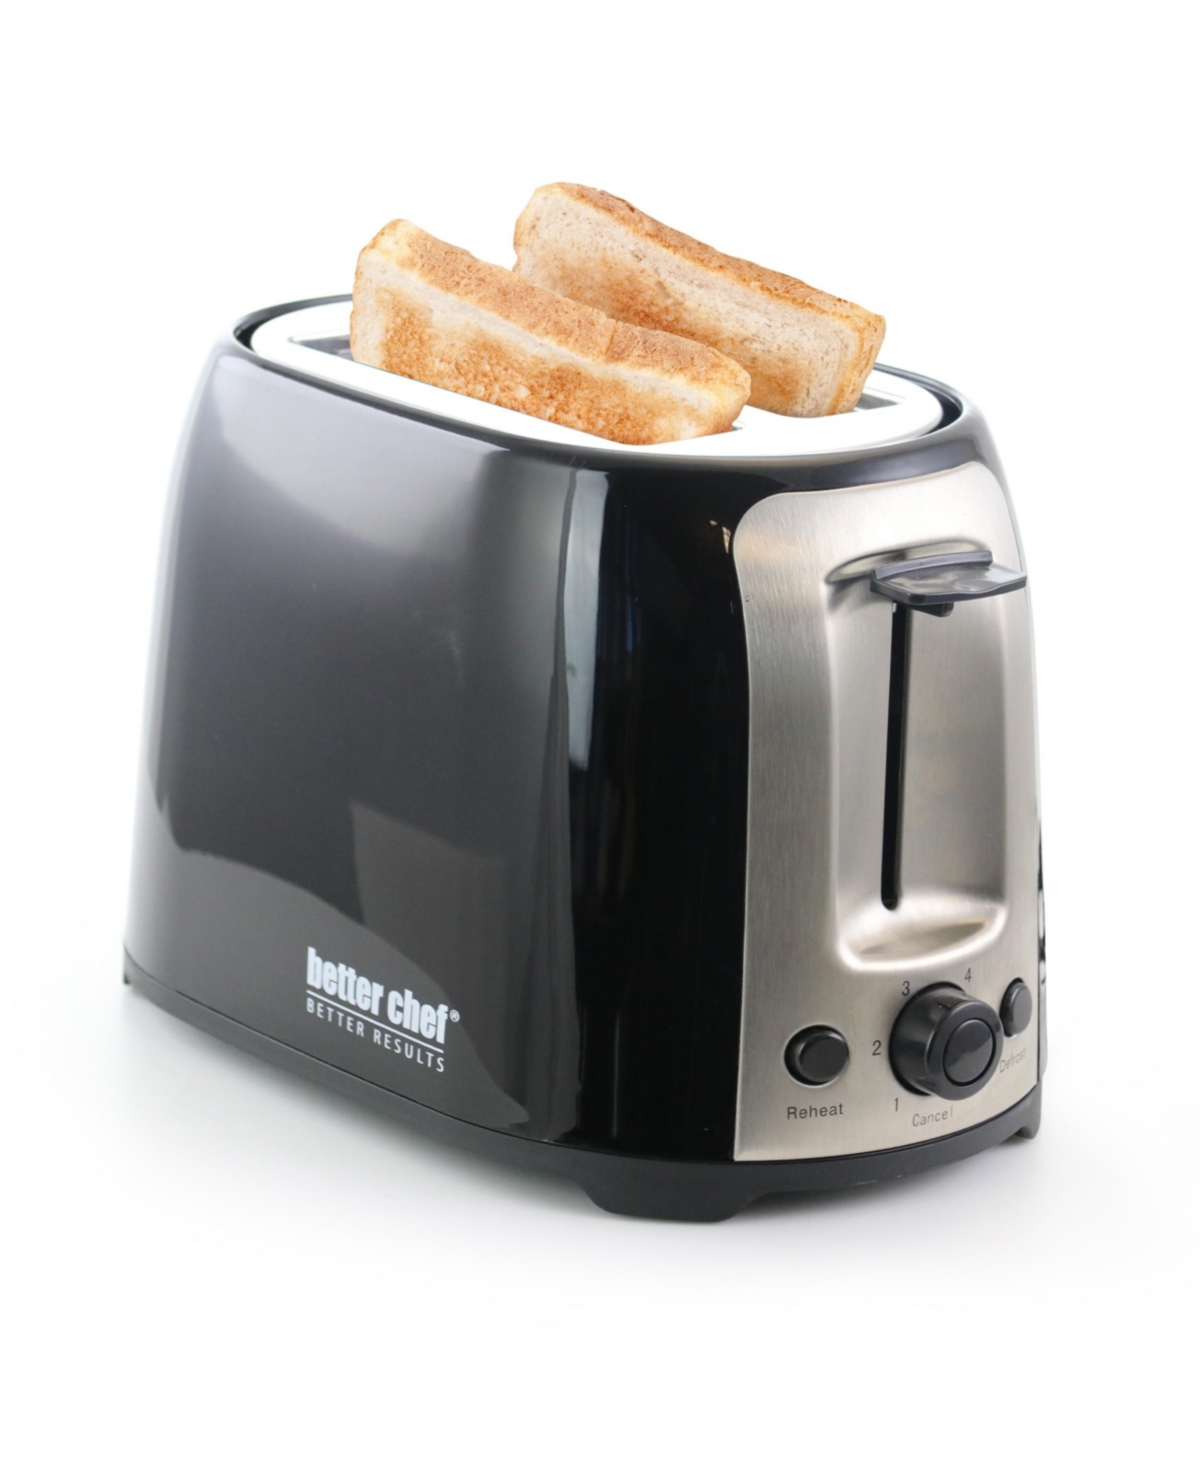 15847823 Better Chef Cool Touch Wide Slot Toaster with Mode sku 15847823